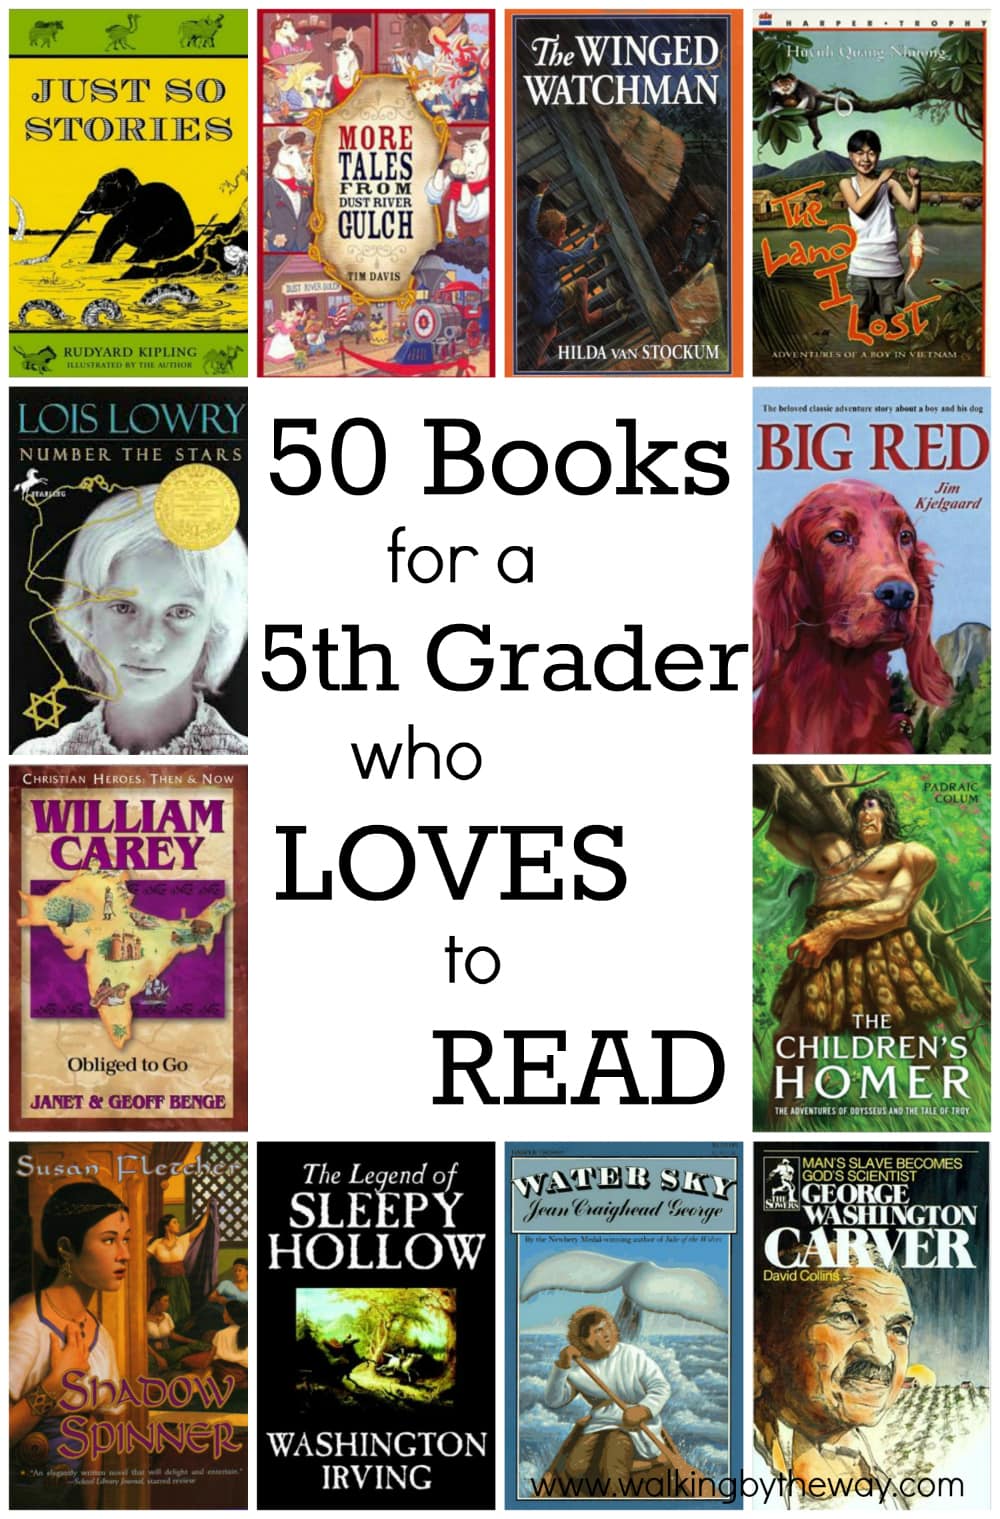 50-books-for-a-5th-grader-who-loves-to-read-walking-by-the-way